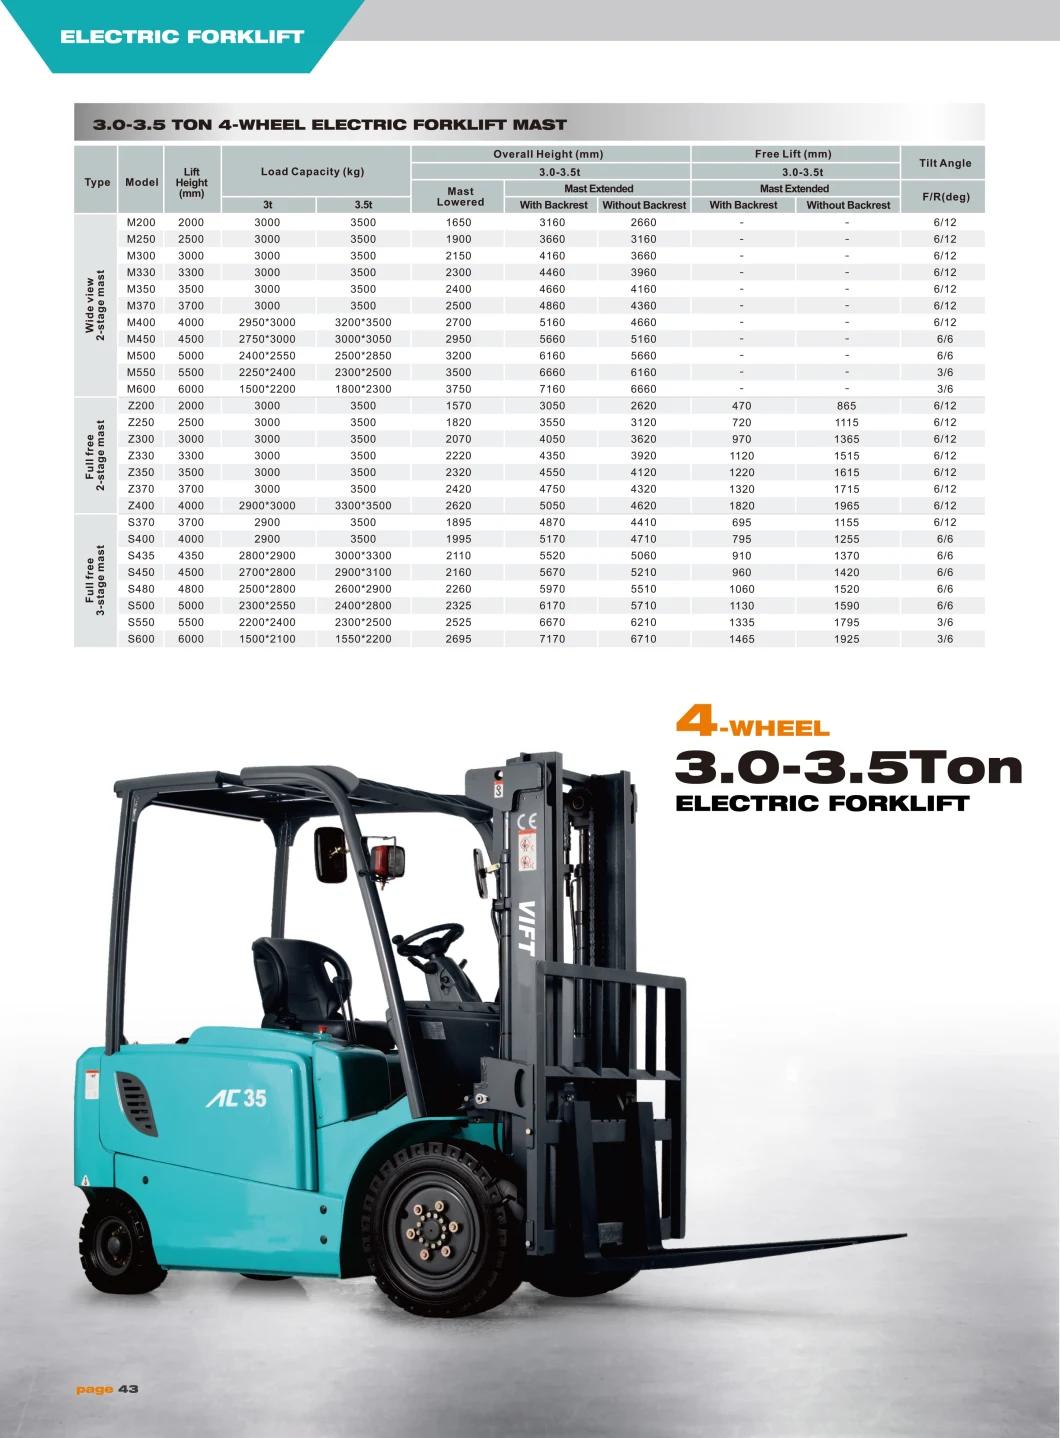 2.5t Electric Forklift Truck Used for Bale Clamp Attachments